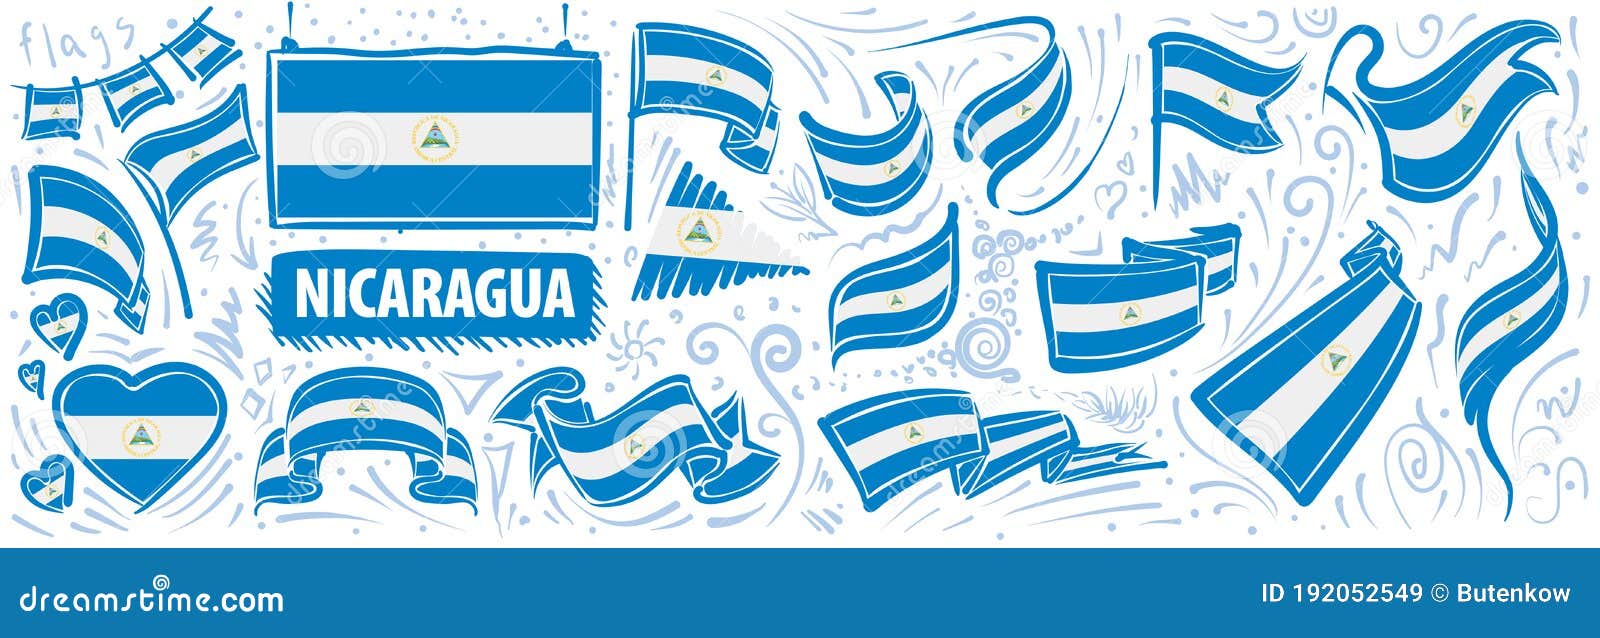  set of the national flag of nicaragua in various creative s